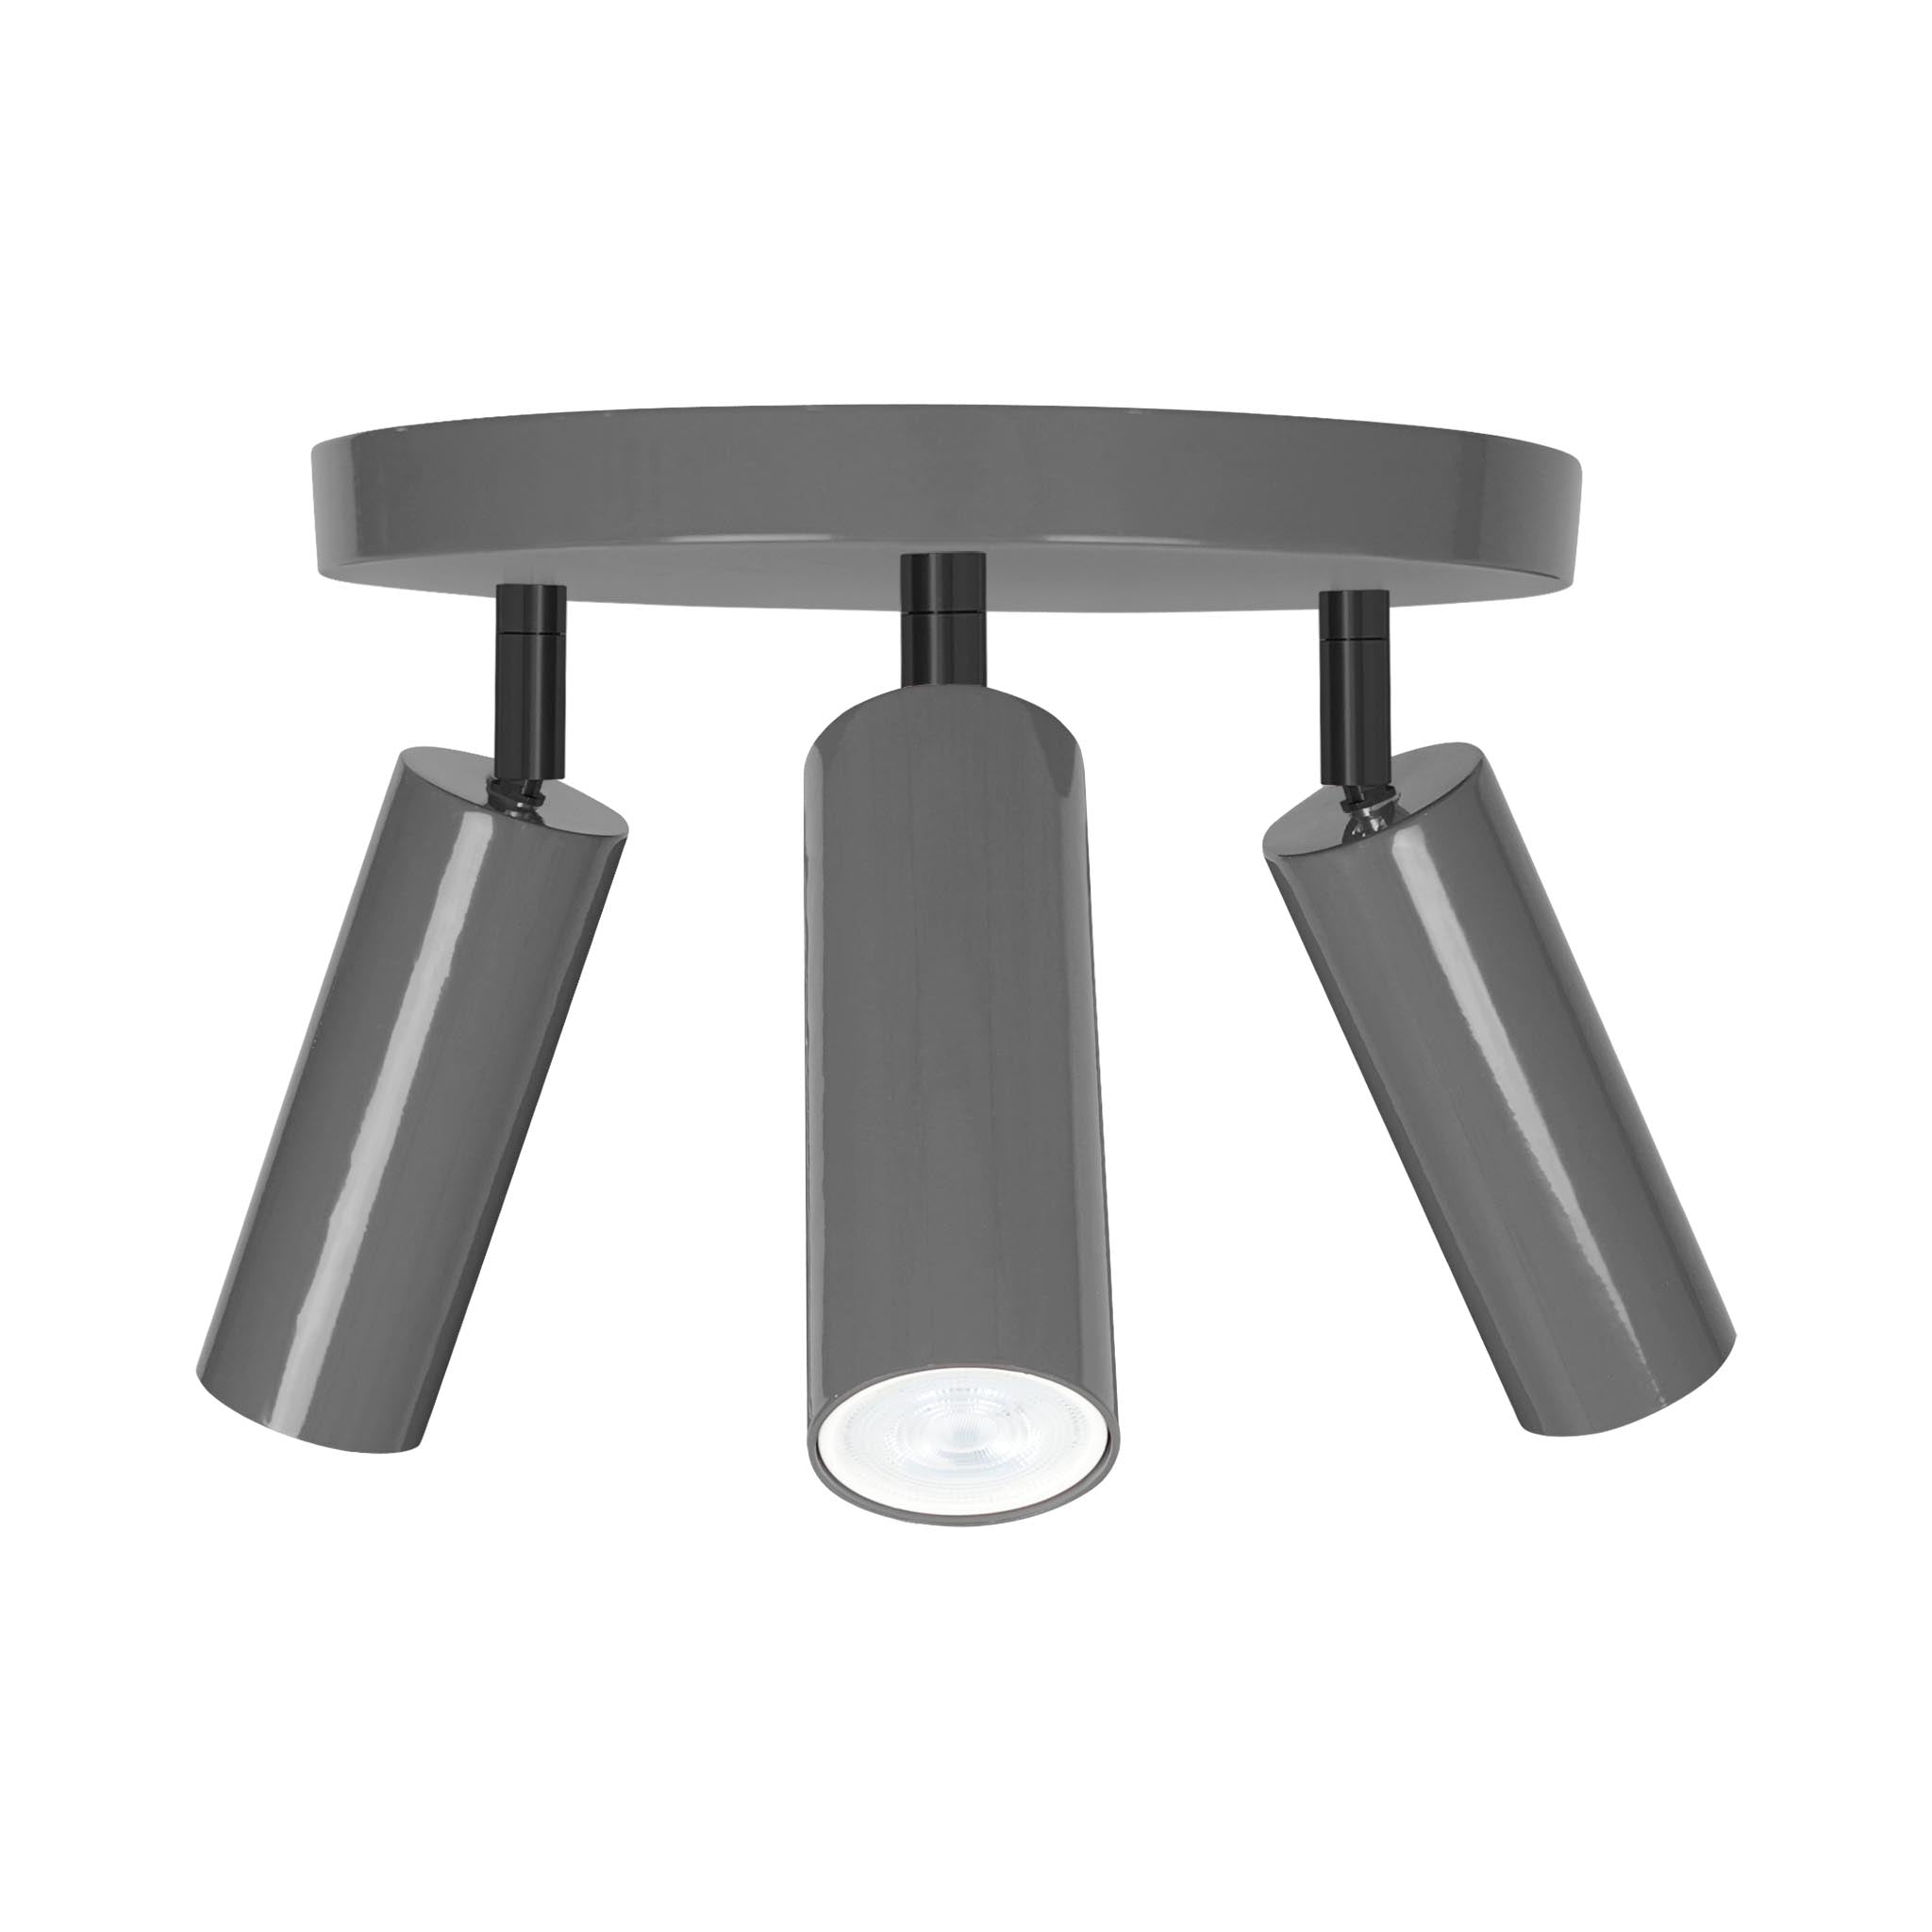 Black and charcoal color Pose flush mount Dutton Brown lighting